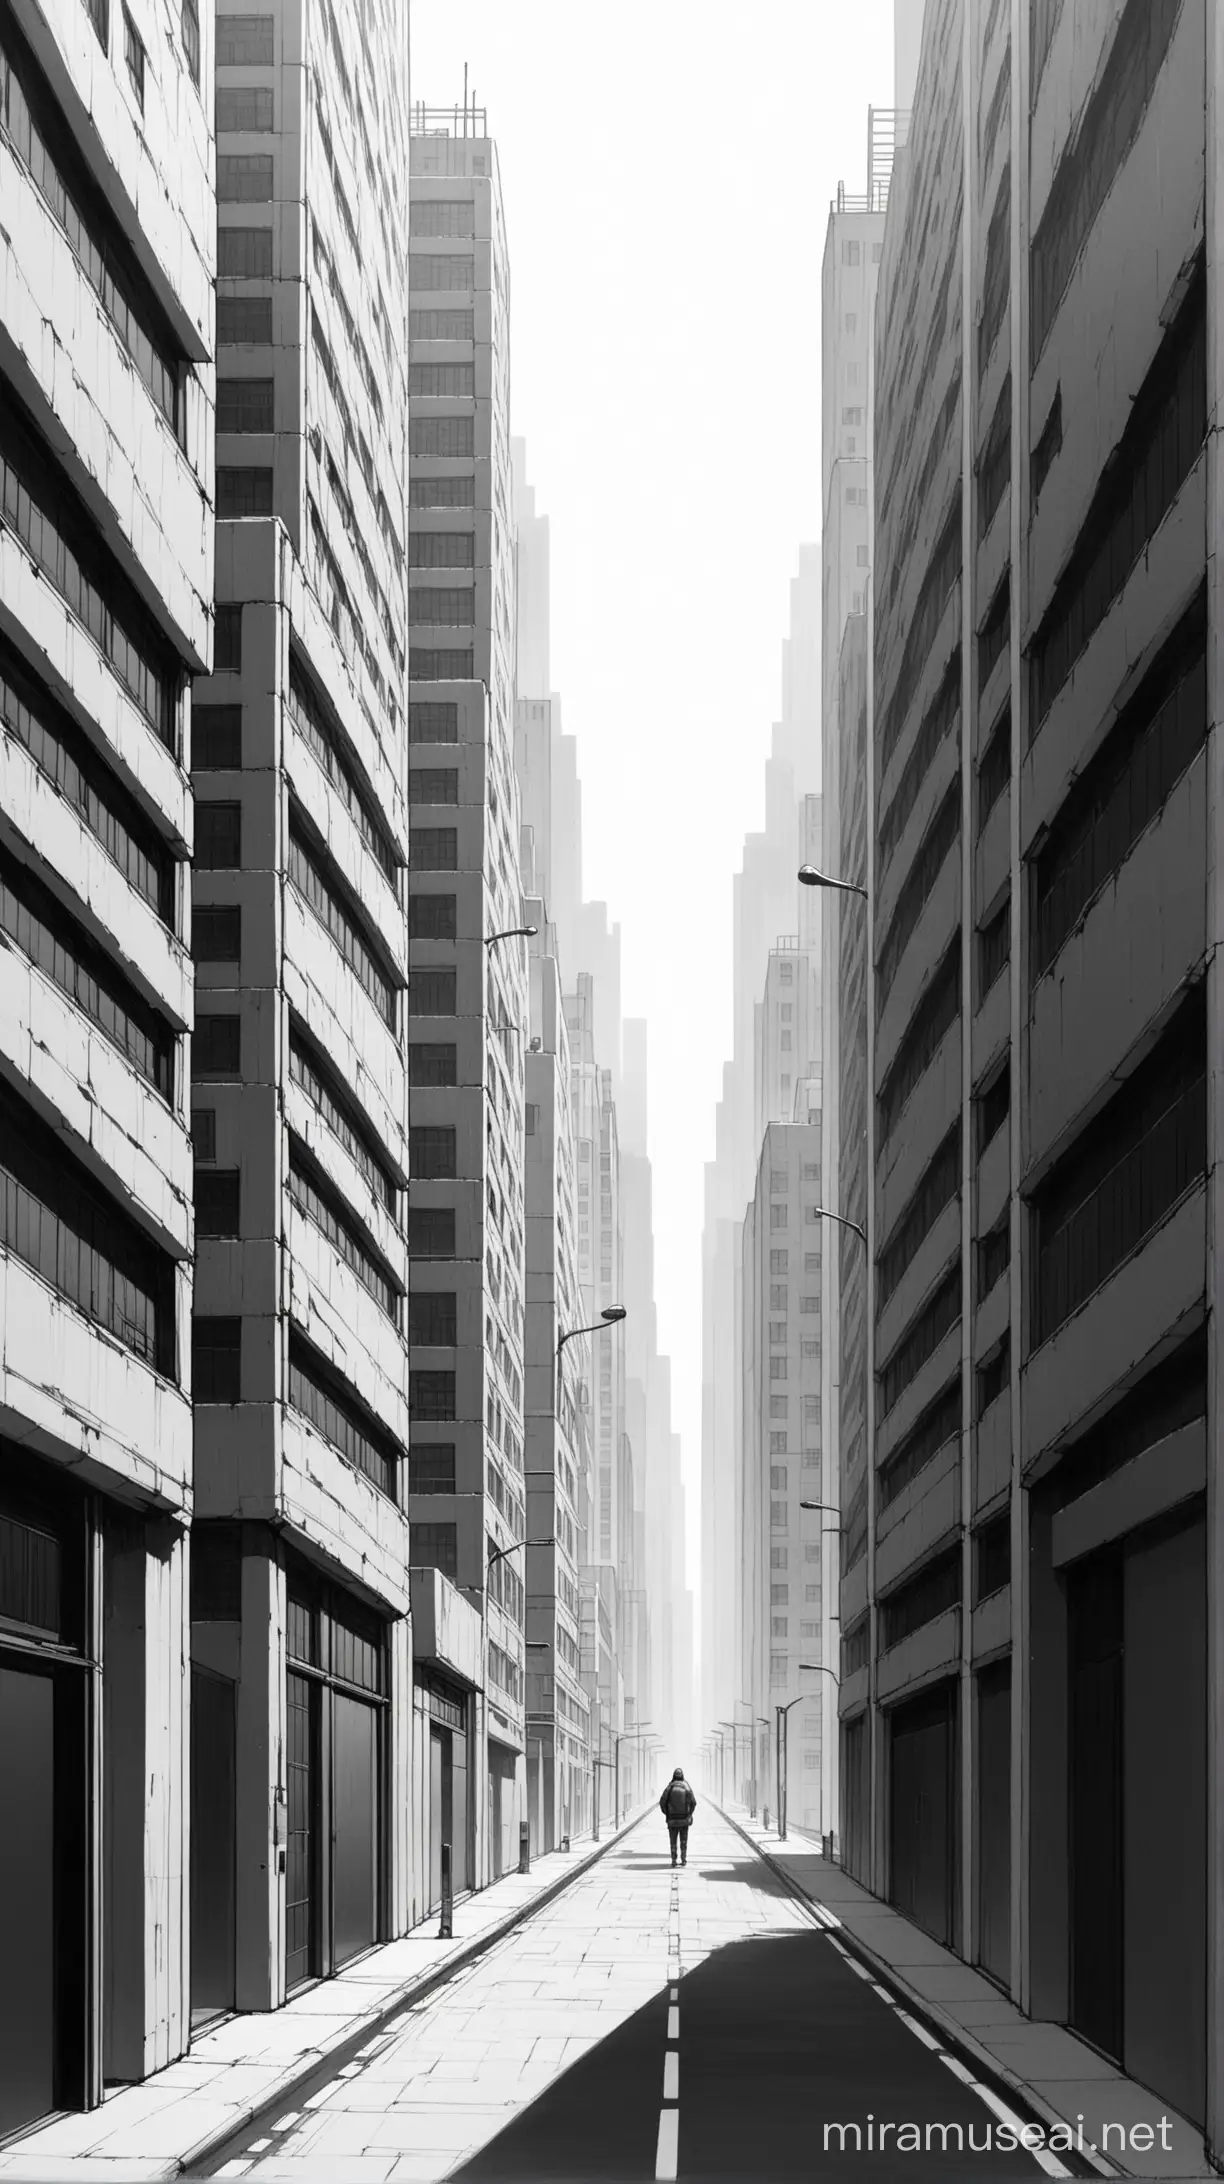 Create a cityscape background with simple, low-rise buildings with a road in the centre. using a black and white color with shadow. These buildings should be of varying heights but generally shorter. Include details such as windows and doors to add realism, but keep them minimal. Ensure that the background complements the central figure of the urban explorer and leaves ample space at the top for additional elements.